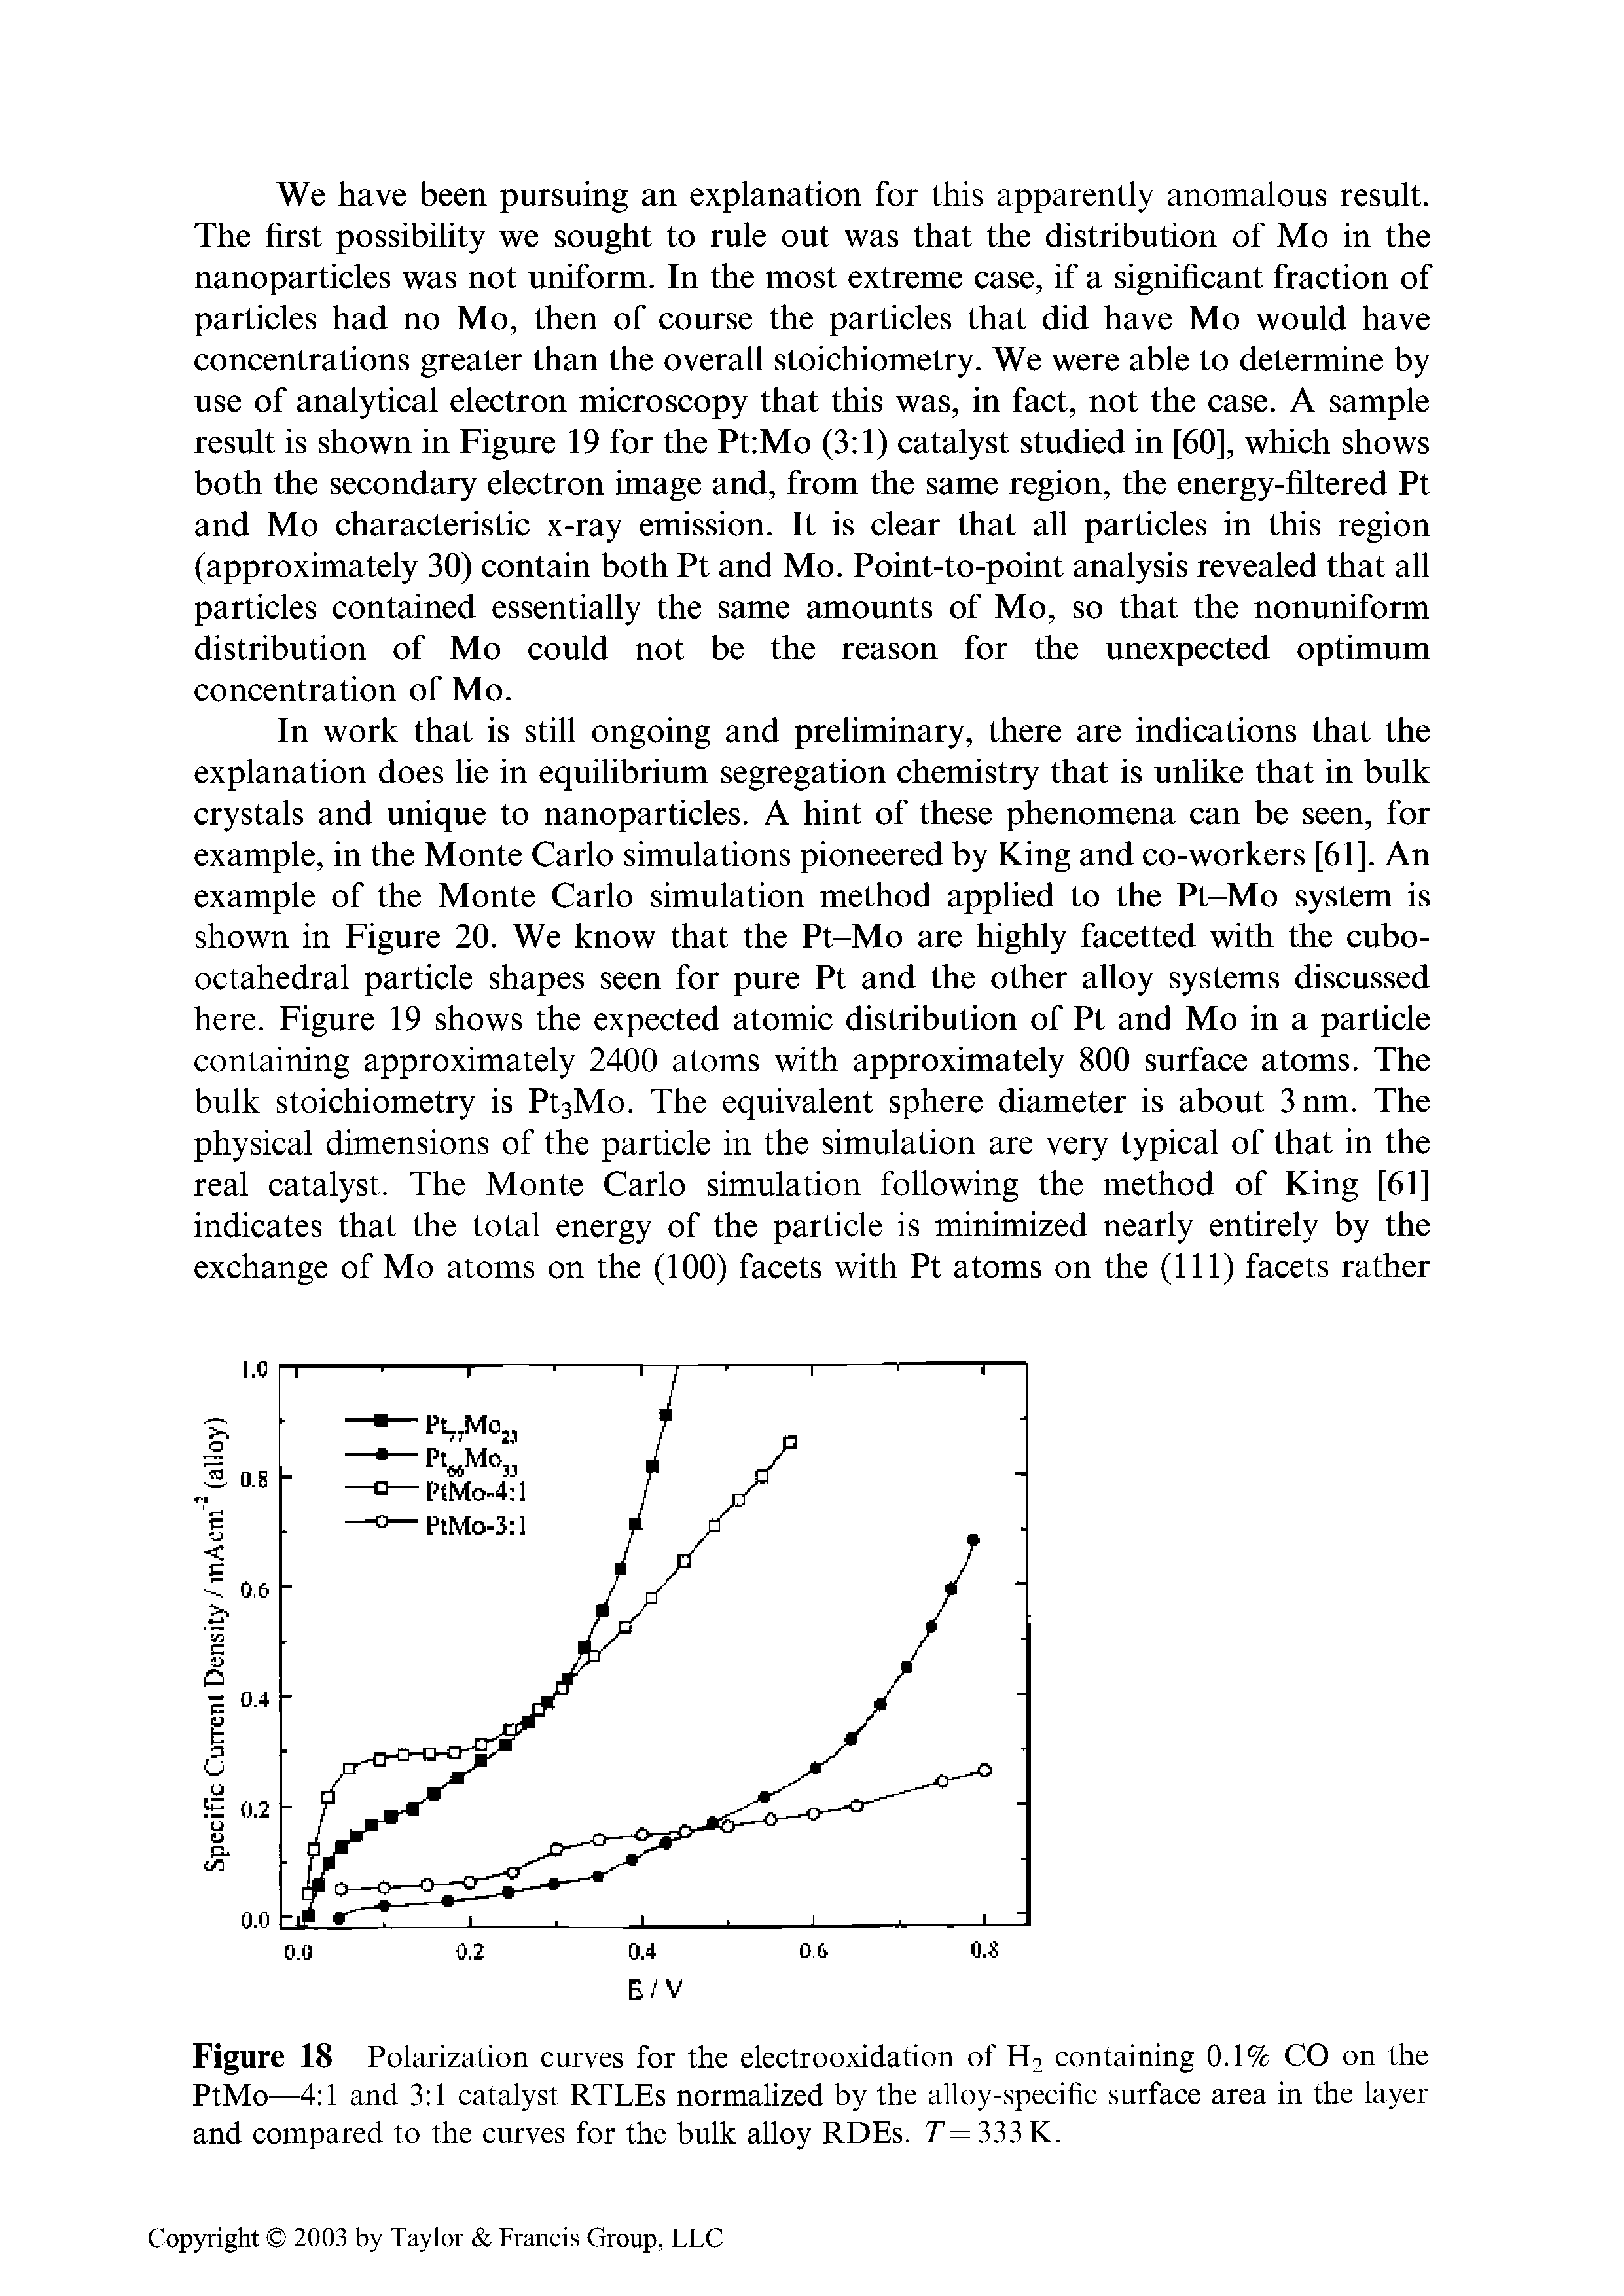 Figure 18 Polarization curves for the electrooxidation of H2 containing 0.1% CO on the PtMo—4 1 and 3 1 catalyst RTLEs normalized by the alloy-specific surface area in the layer and compared to the curves for the bulk alloy RDEs. T = 333 K.